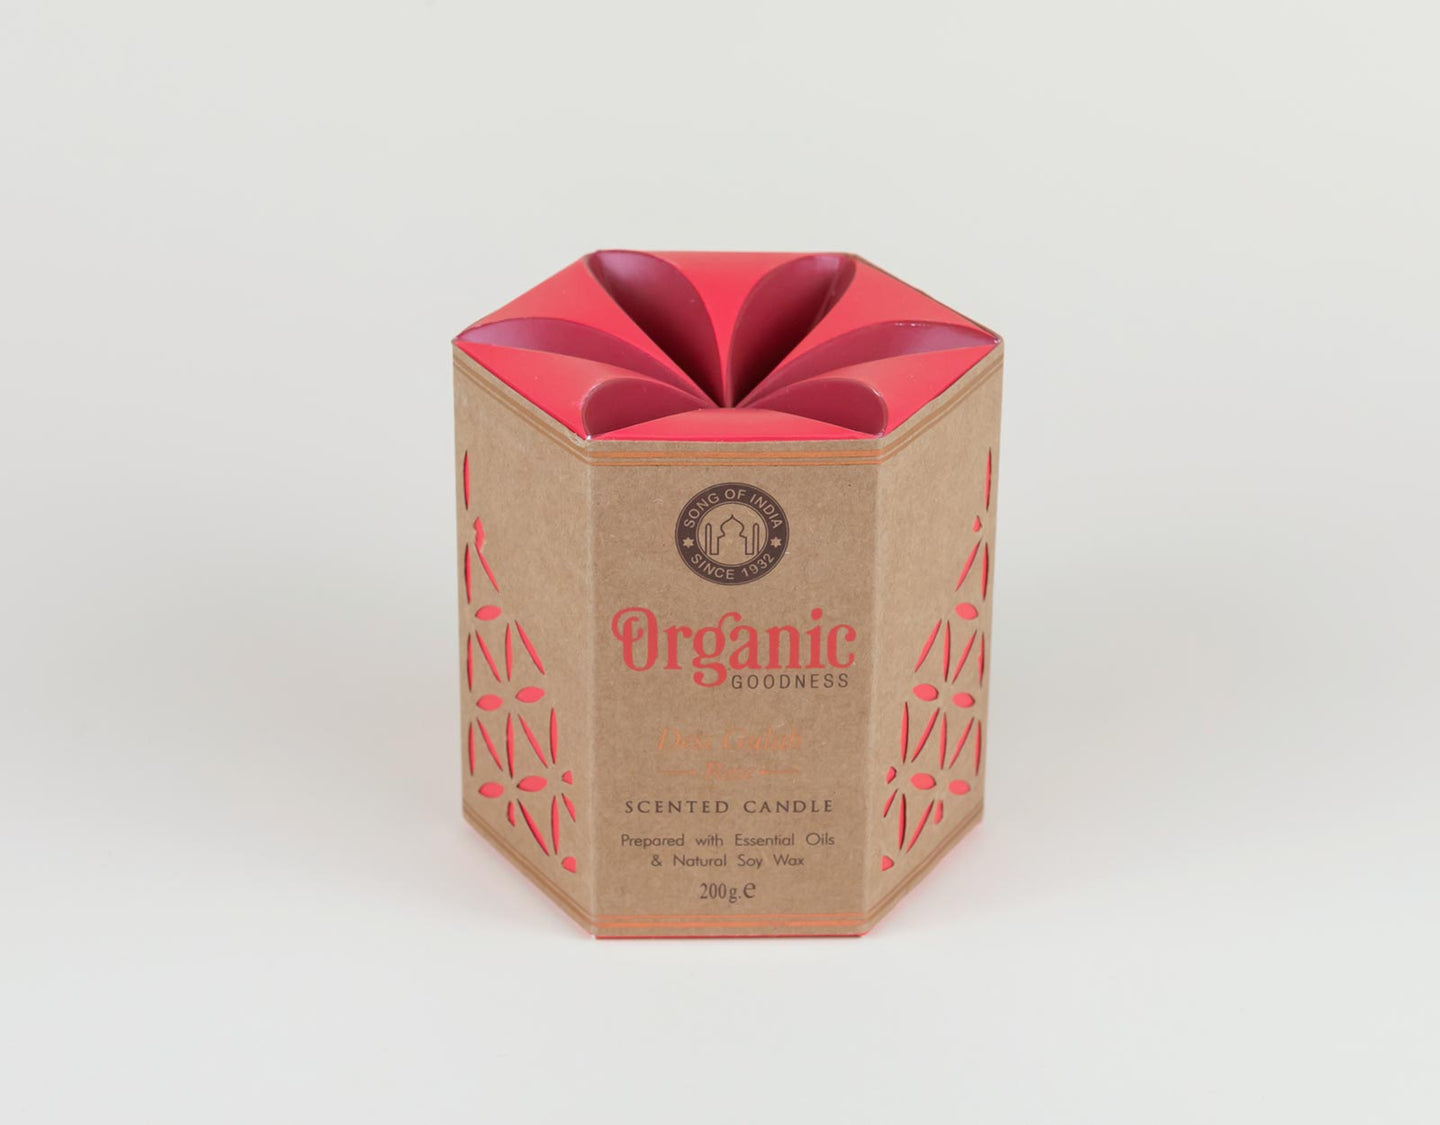 Organic Scented Candel